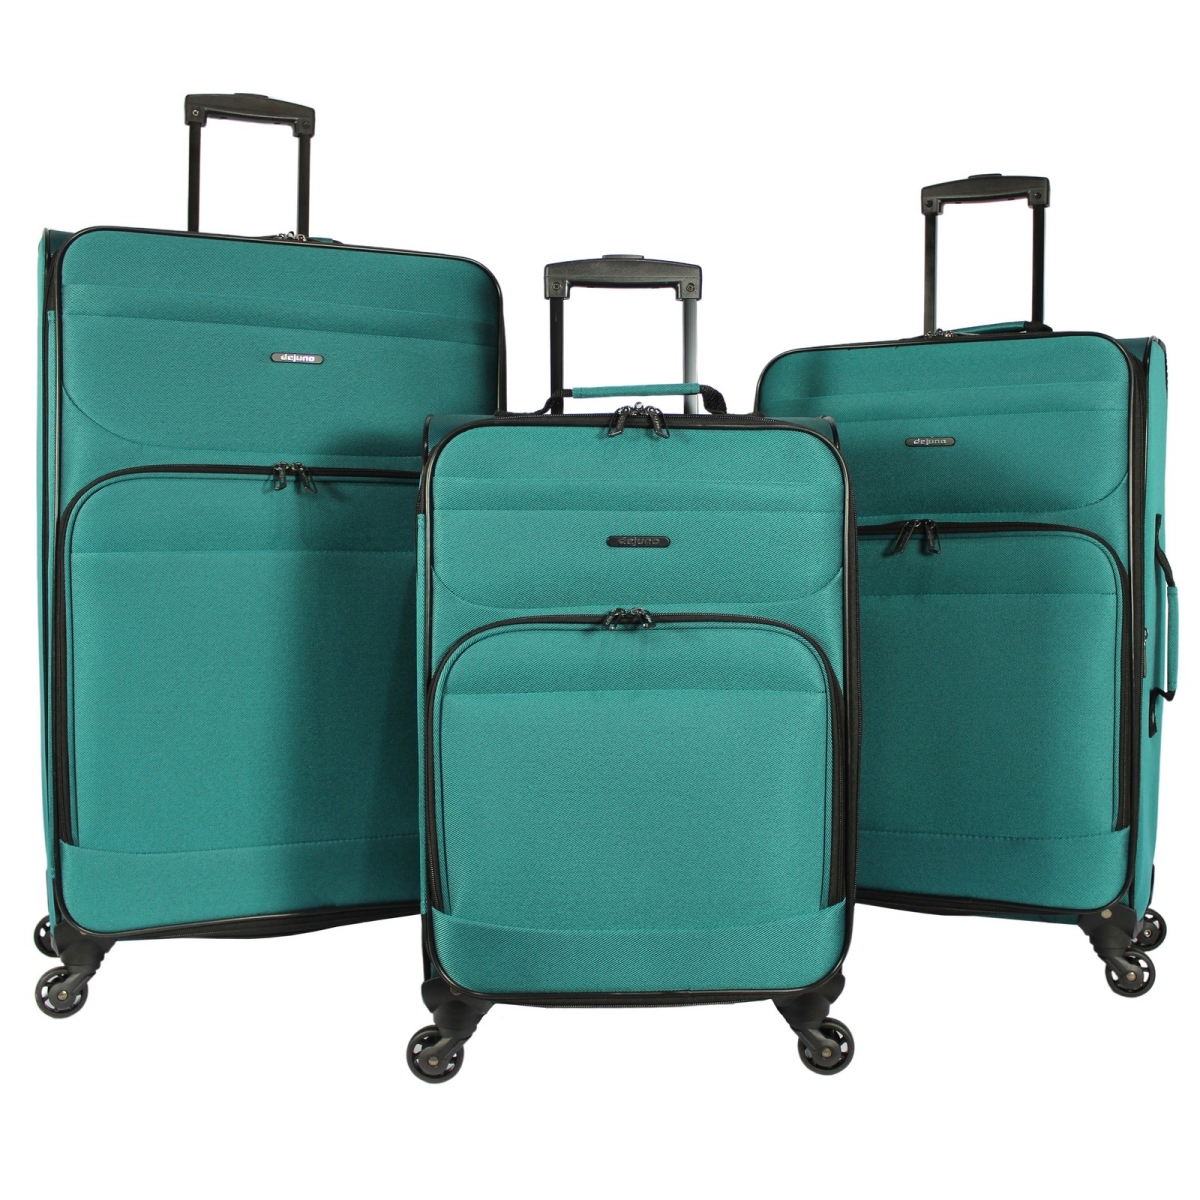 Picture of Dejuno 252104DJ-TEAL Lisbon Lightweight Expandable Spinner Luggage Set, Teal - 3 Piece